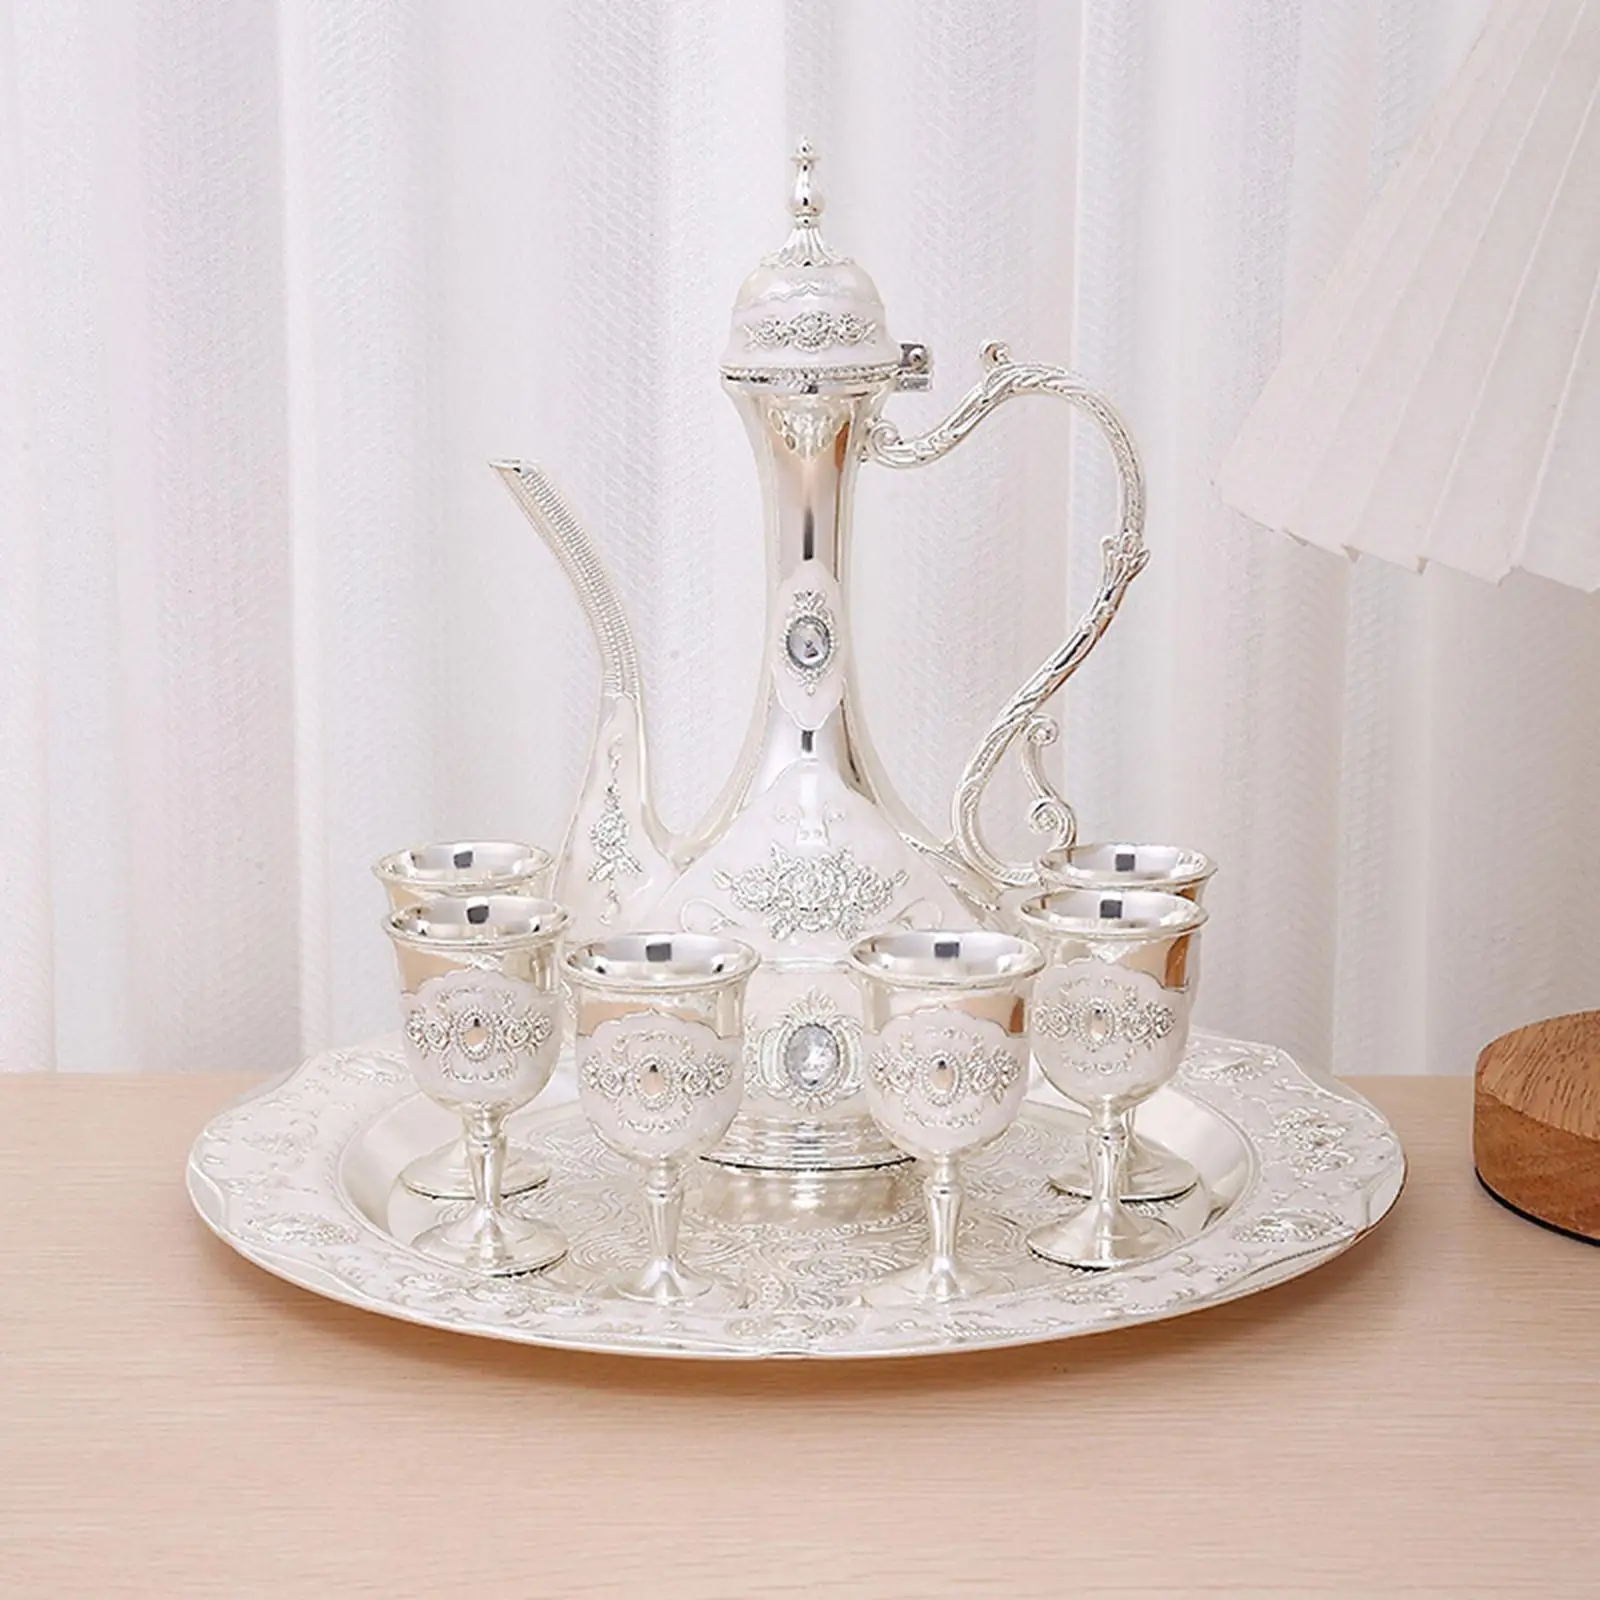 Turkish Teapot Set and Tray Crafts 6 Metal Cups for Home Tea Table Birthday Gift Wedding Gift Housewarming Gift